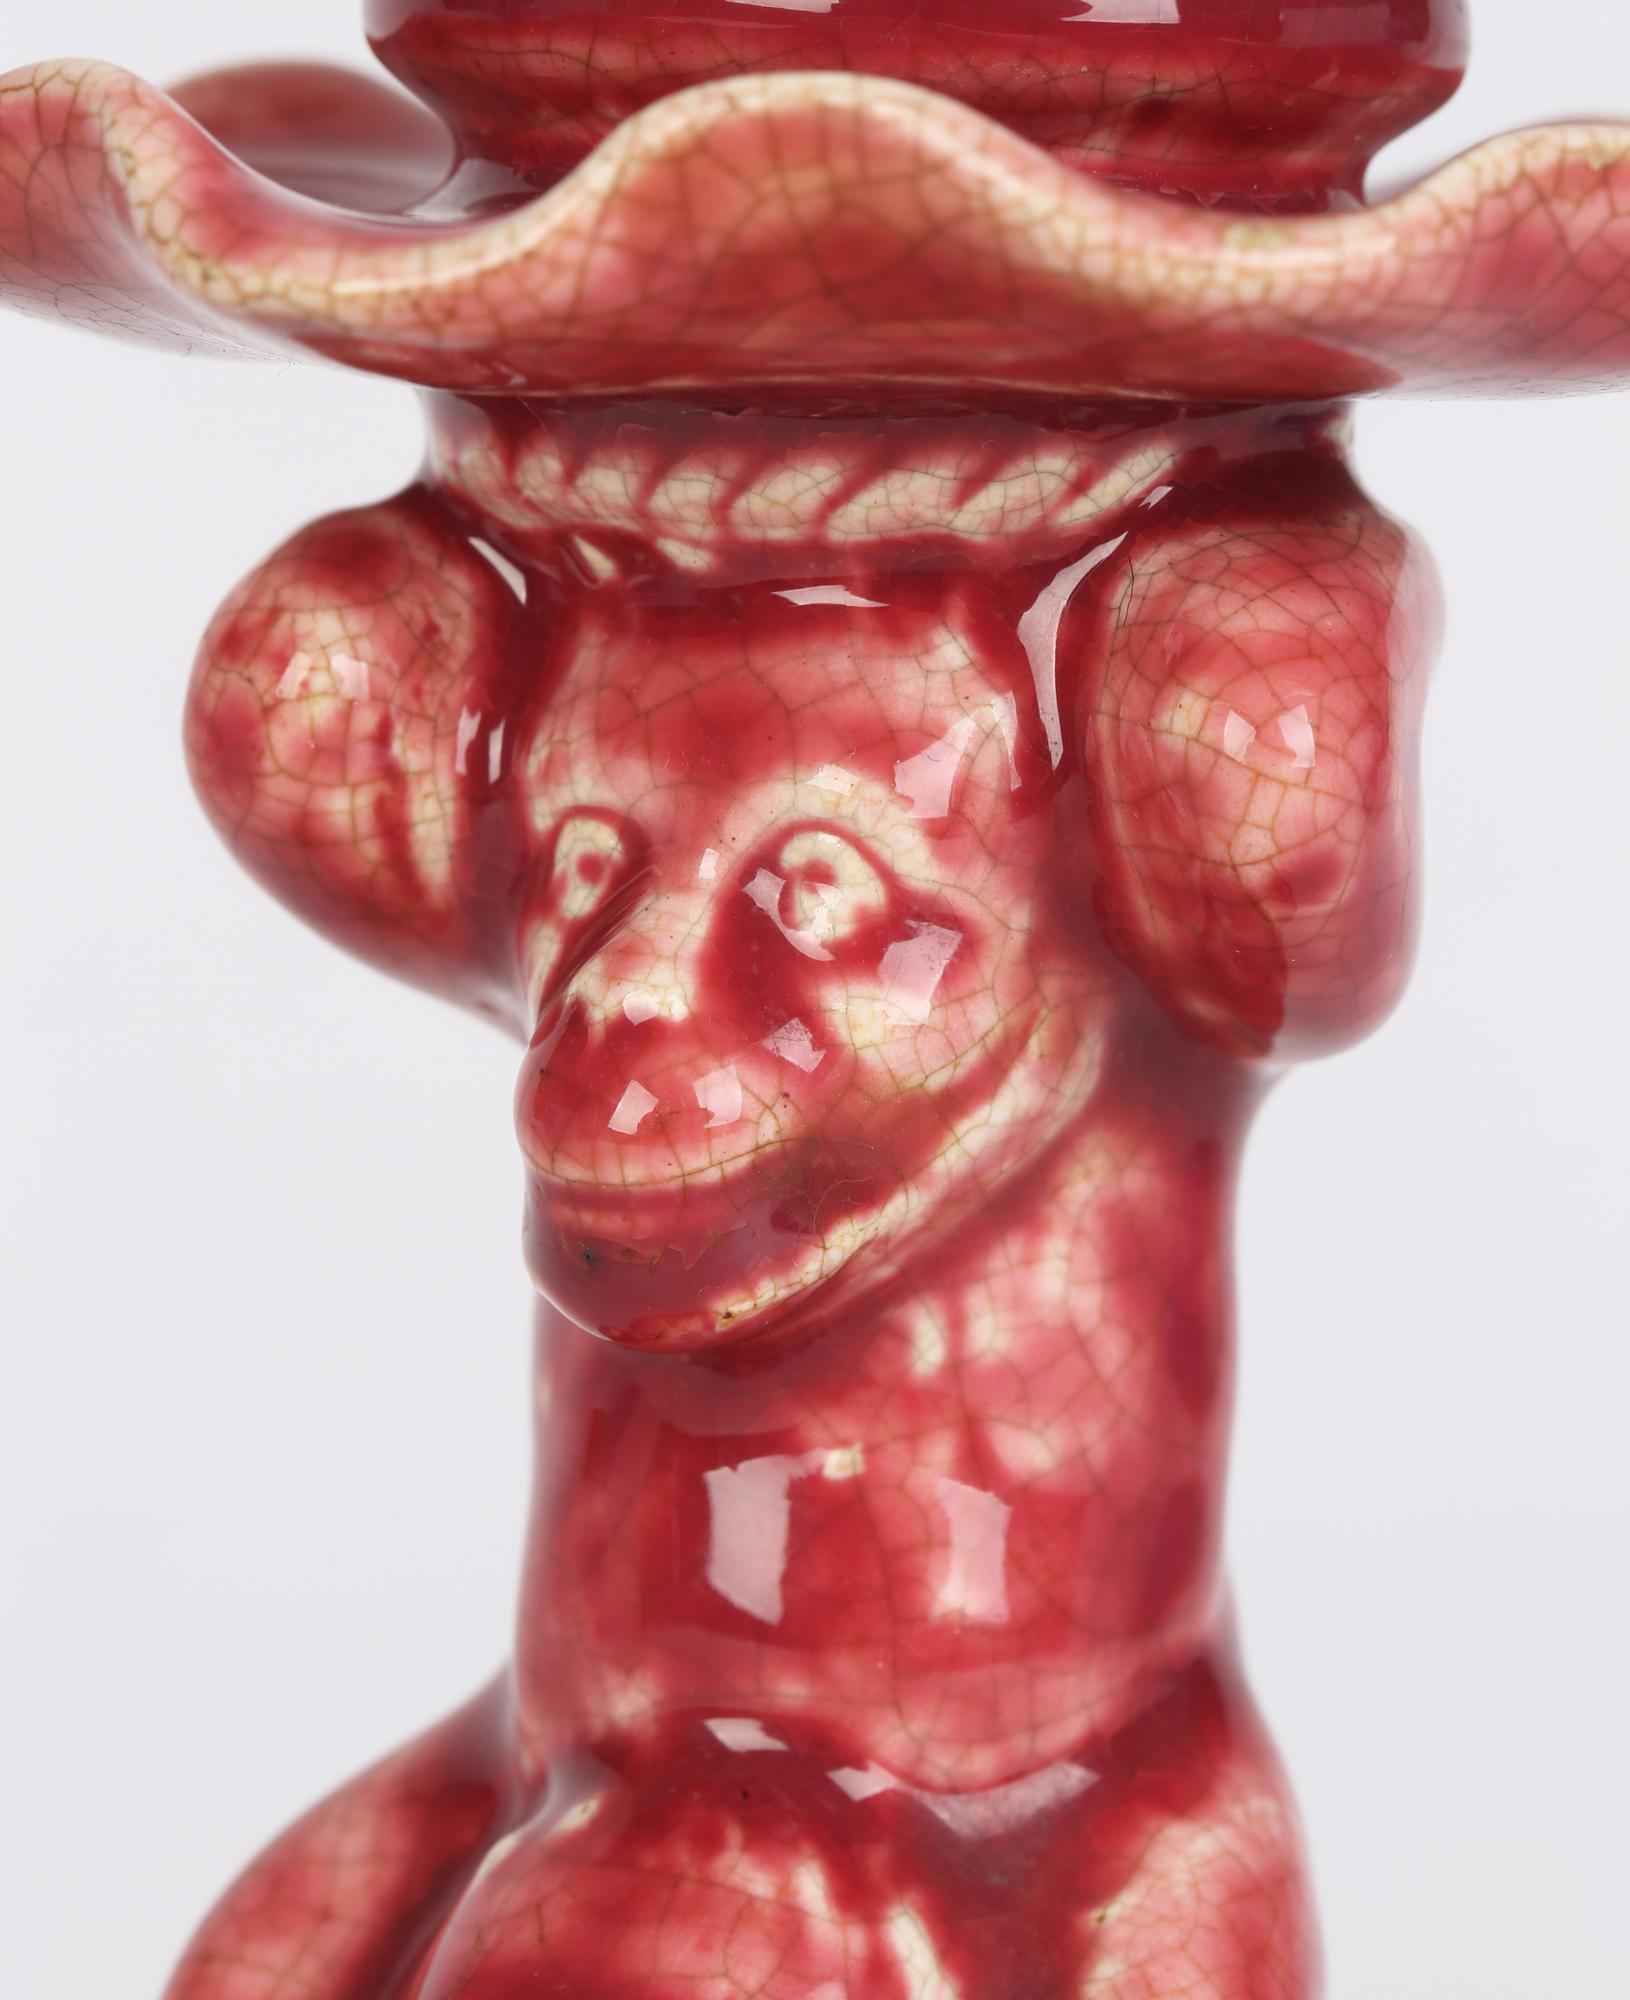 Minton Aesthetic Movement Plum Red Glazed Art Pottery Monkey Candlestick For Sale 4